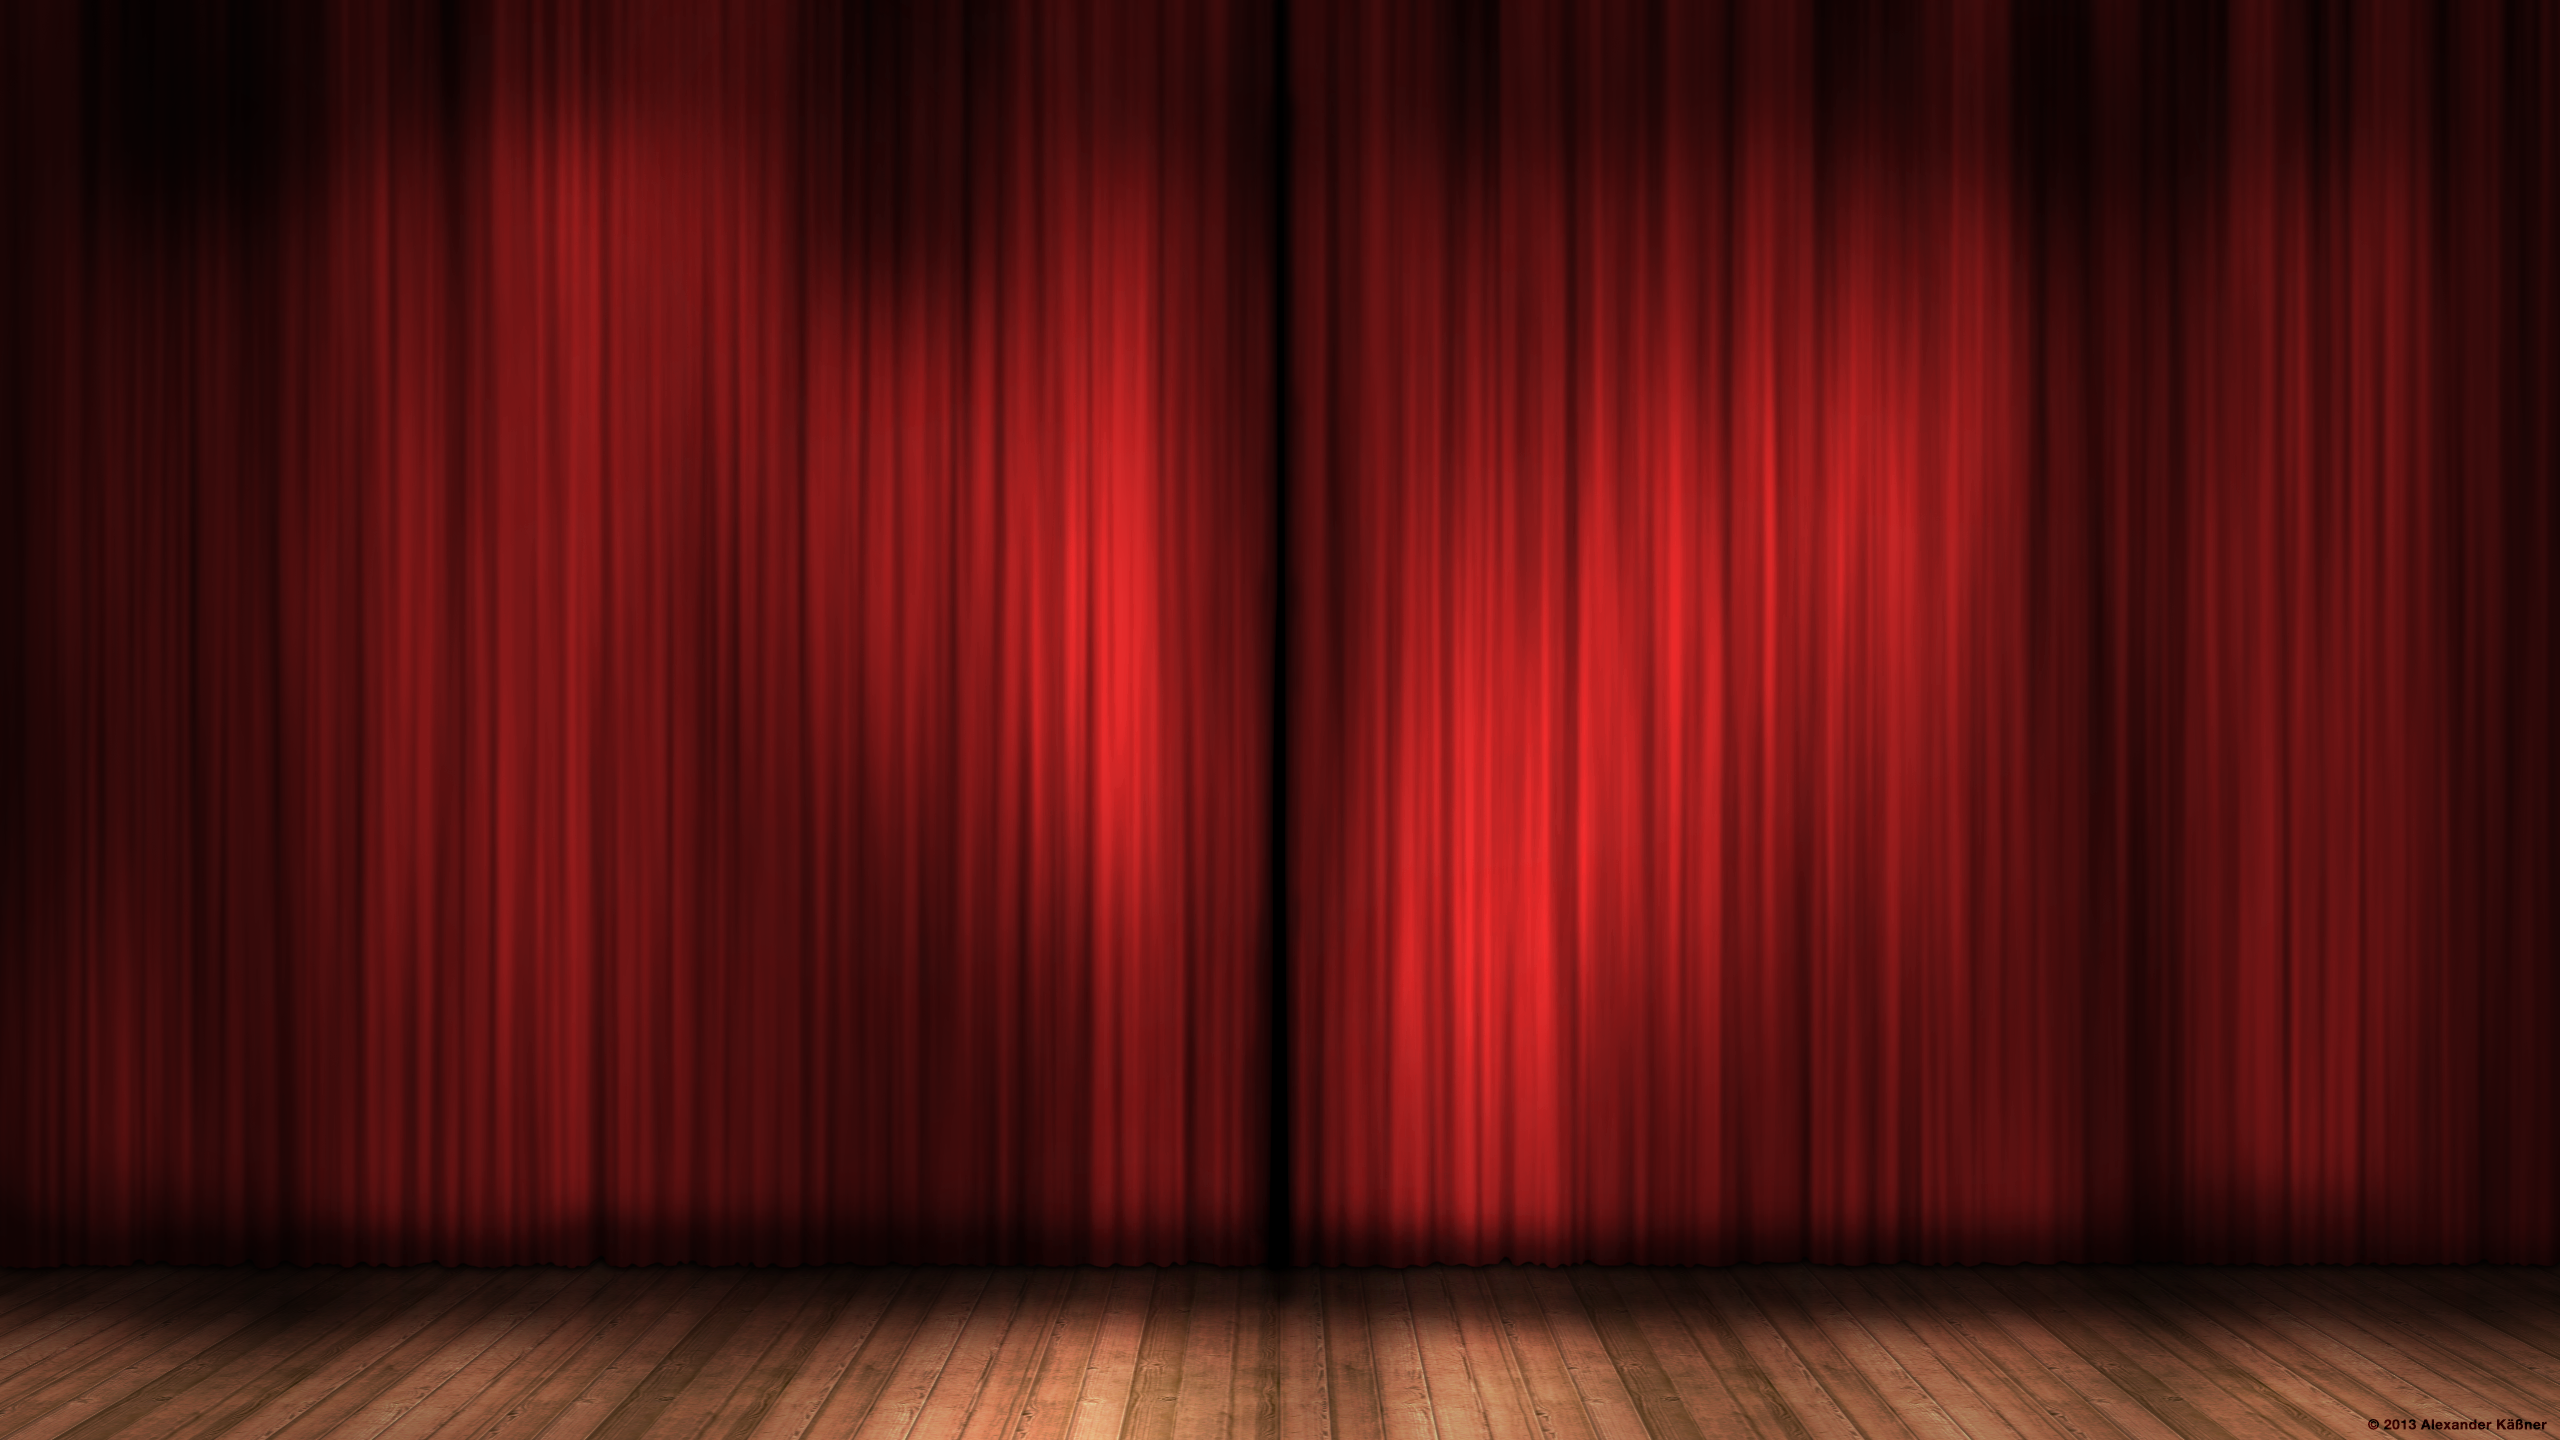 Curtain Download PNG